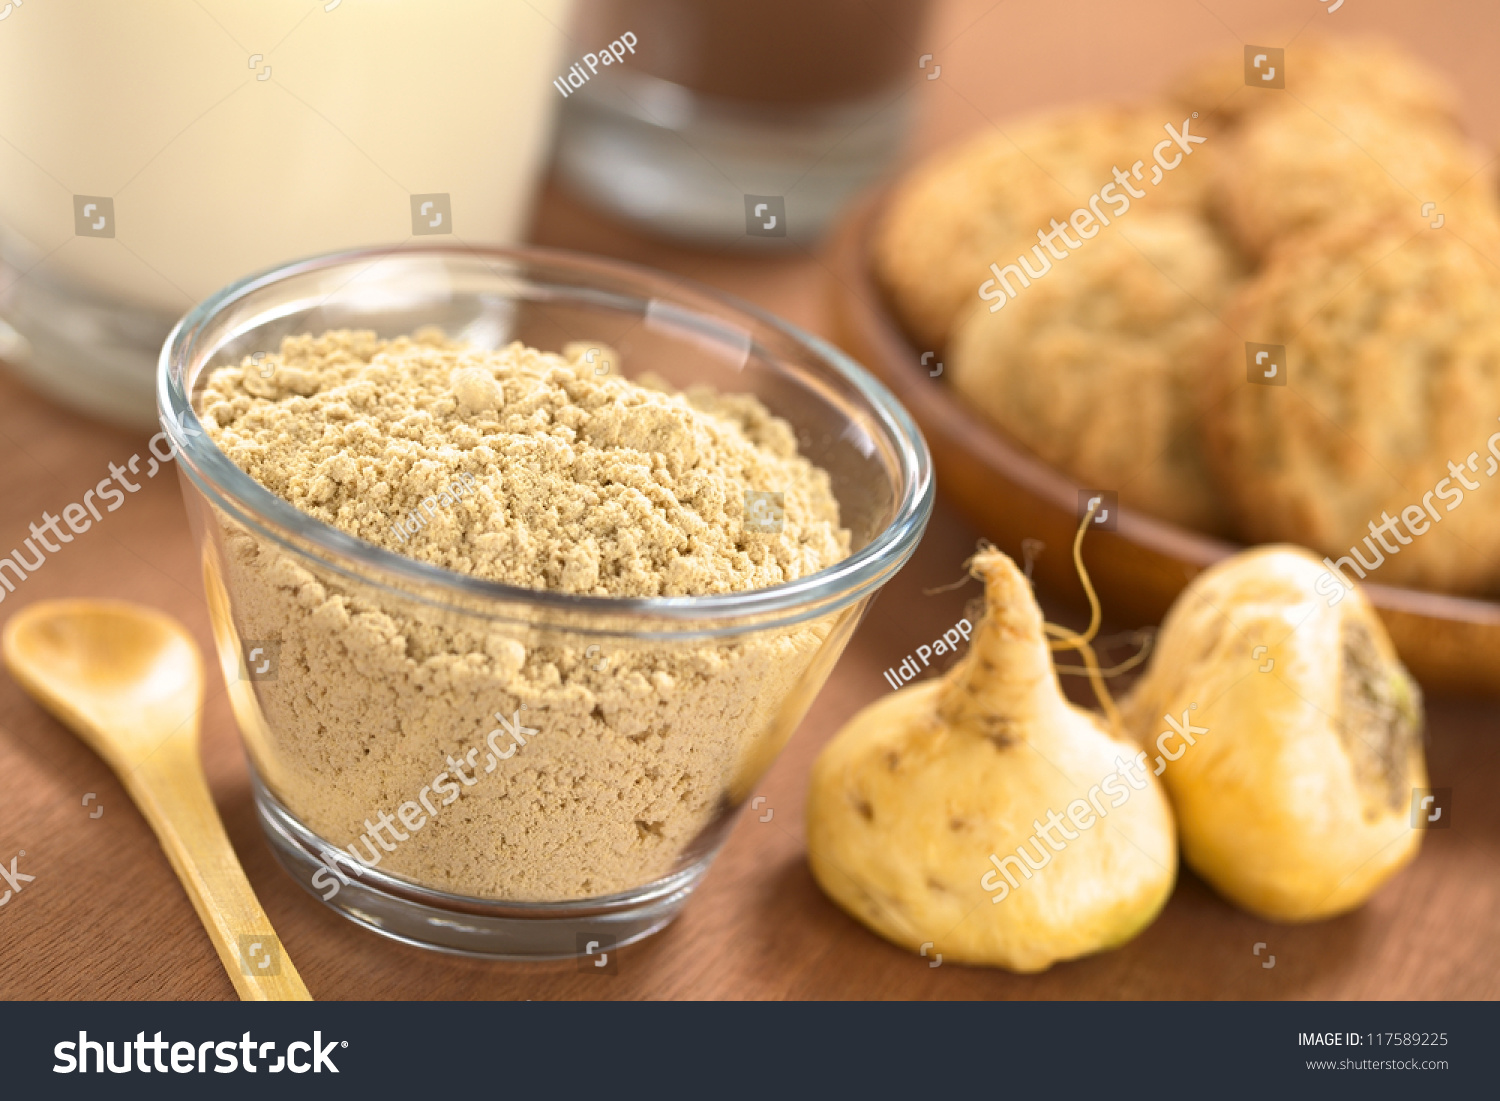 Powdered Maca or Peruvian ginseng (lat. Lepidium meyenii) in glass bowl with milk, chocolate drink, maca cookies and maca roots (Selective Focus, Focus one third into the maca powder) #117589225